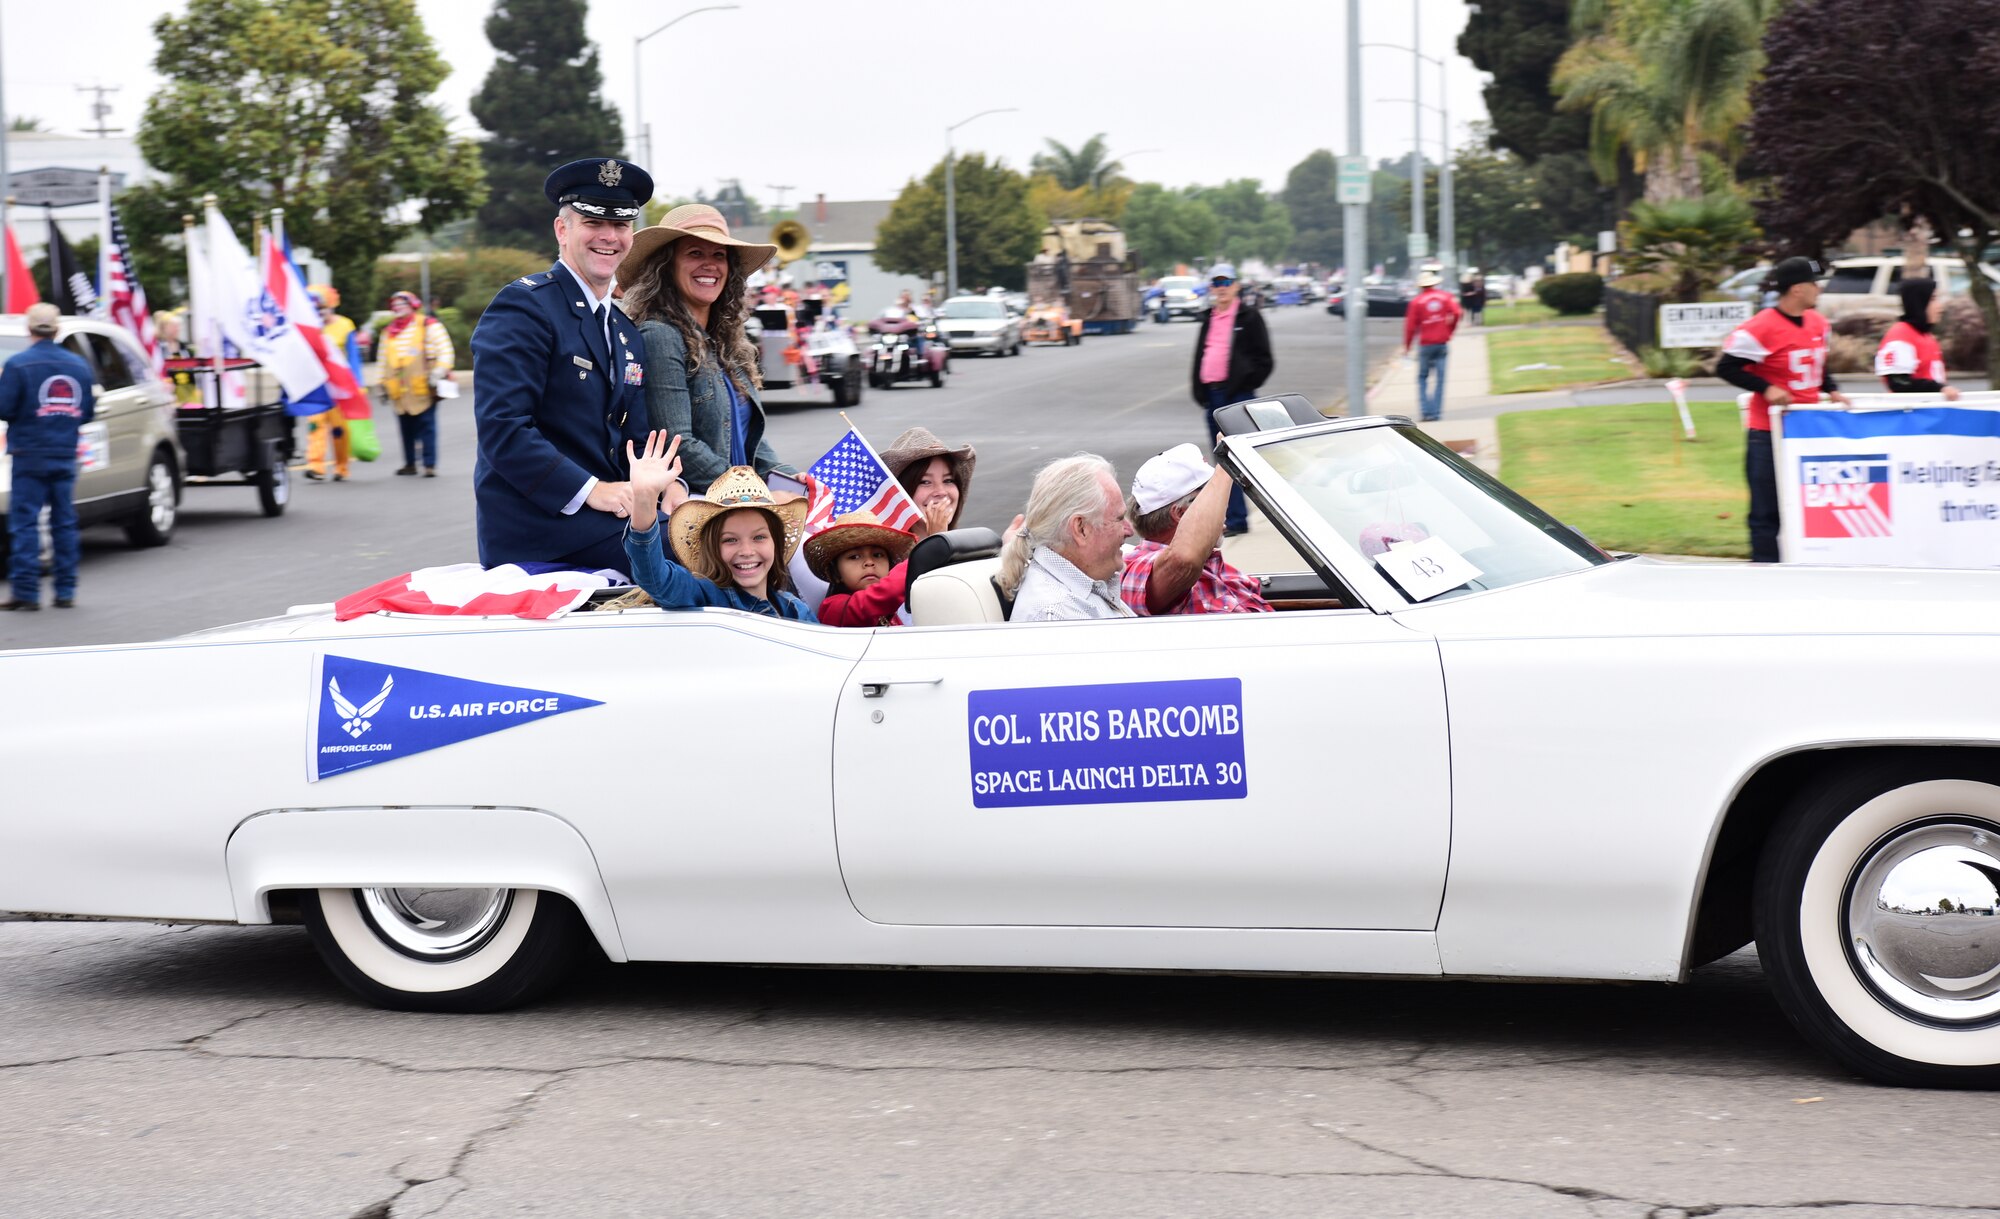 Col. Kris Barcomb, vice commander of Space Launch Delta 30 at Vandenberg Space Force Base, rides and waves to the crowd with his wife and children at the Santa Maria Elks Parade in Santa Maria, Calif., Sept. 4, 2021.  (U.S. Space Force photo by Airman First Class Tiarra Sibley)